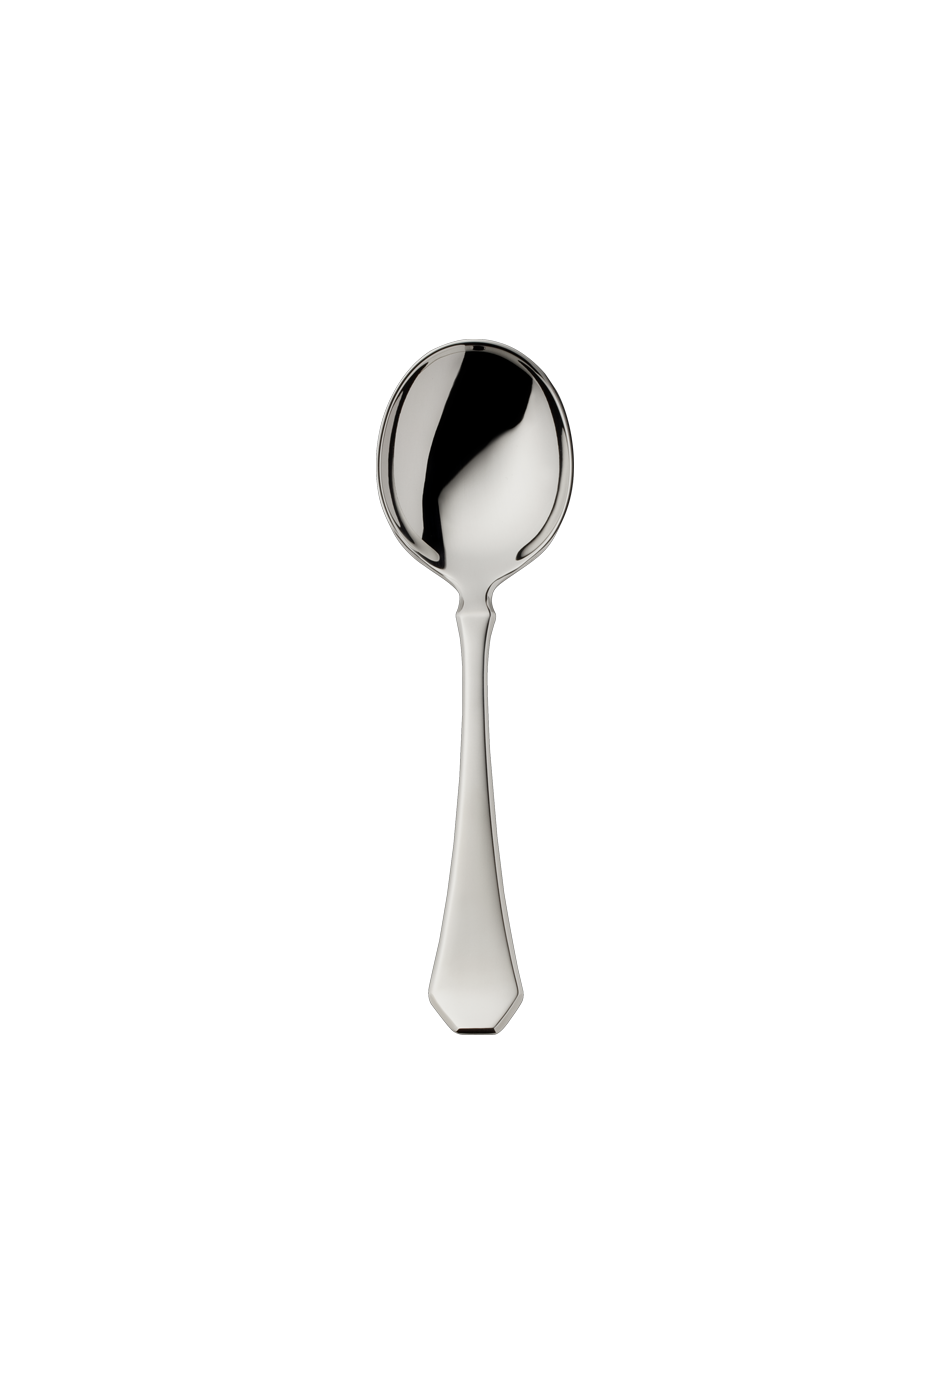 Baltic Cream Spoon (Broth Spoon) (18/8 stainless steel)